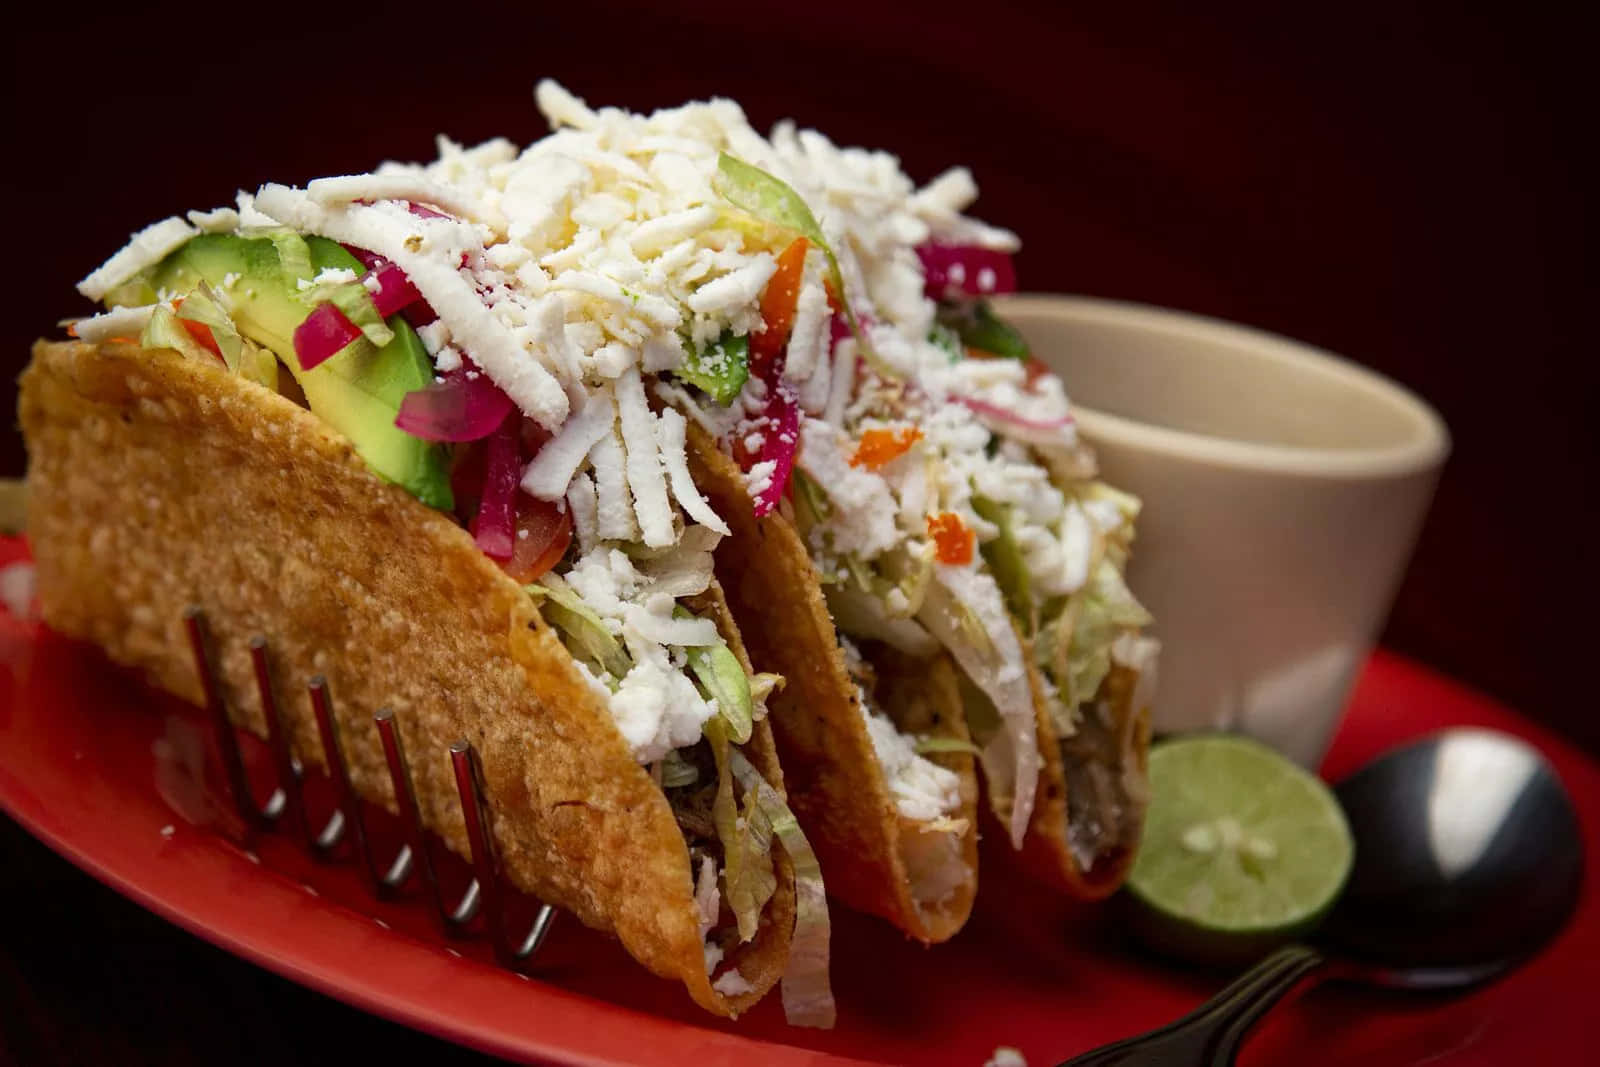 A Taco With Shredded Lettuce And Avocado On A Red Plate